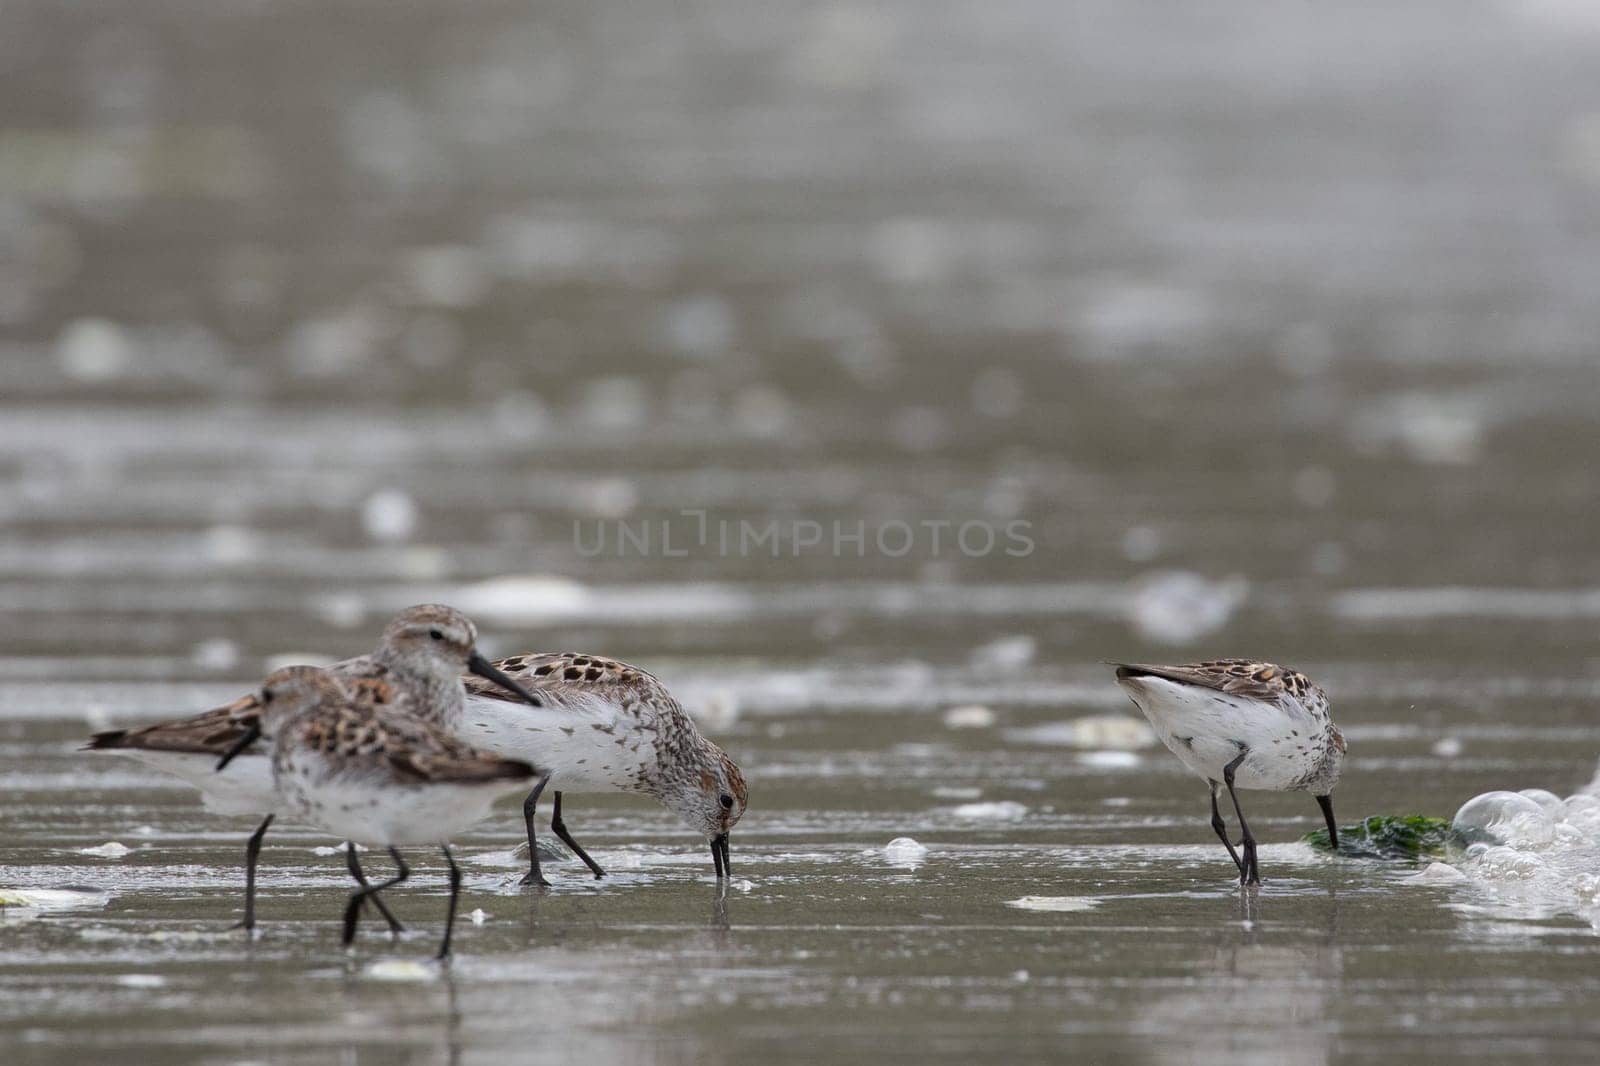 Western sandpipers, Calidris mauri, wading along a deserted shoreline searching for food, near McMicking Inlet, Central British Columbia, Canada